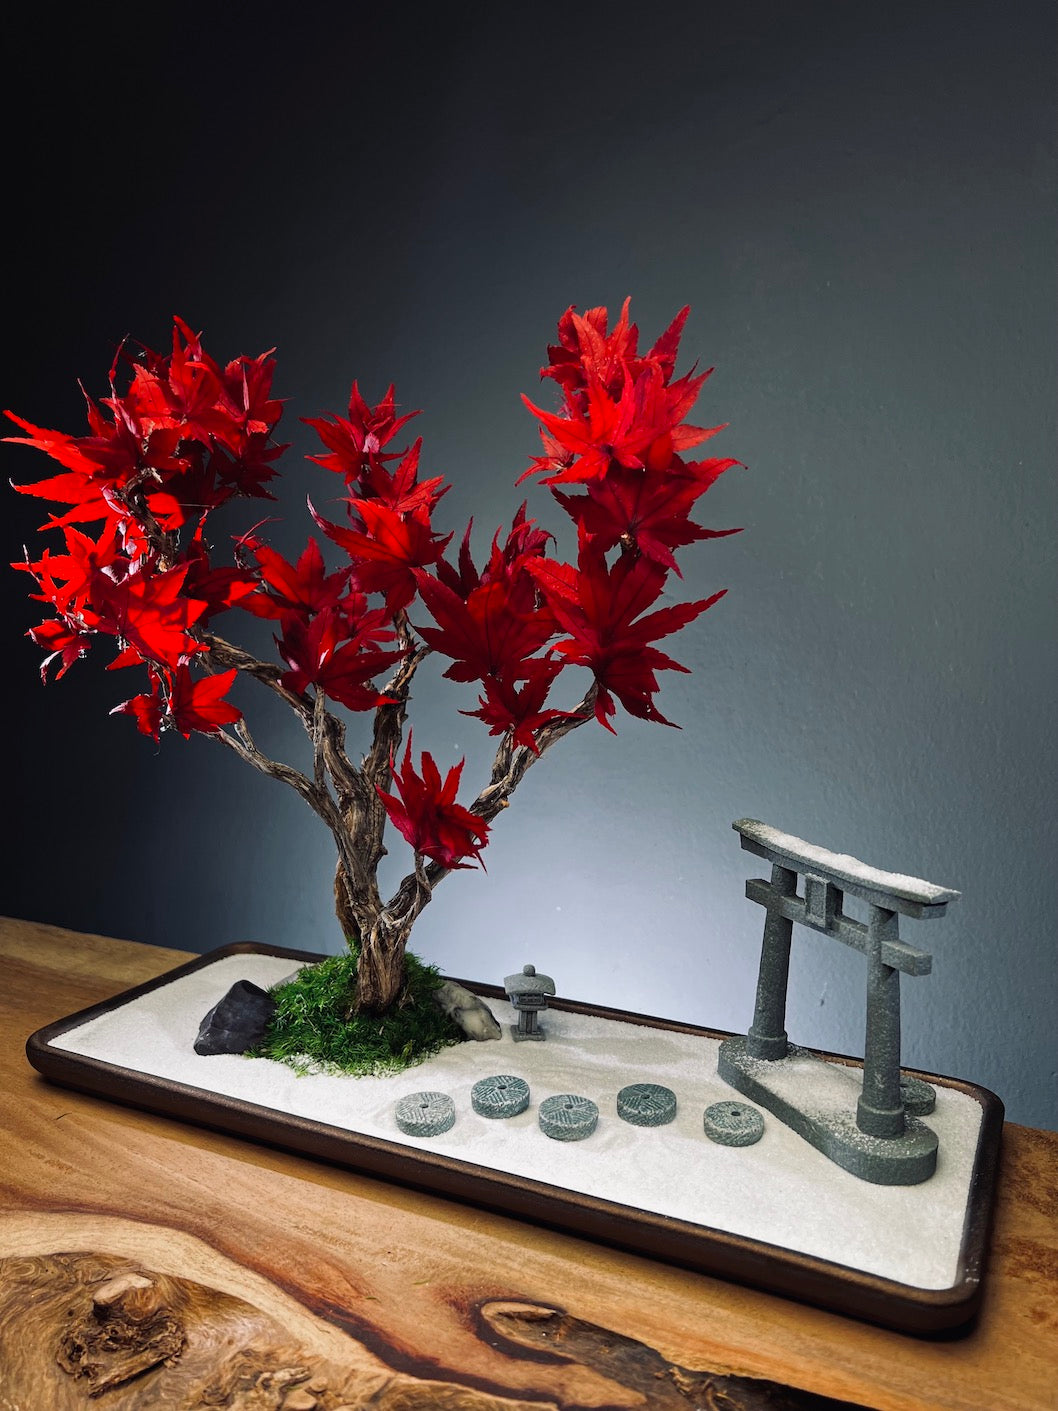 Theatre of Autumn - Flaming Maple (Preserved Plants)